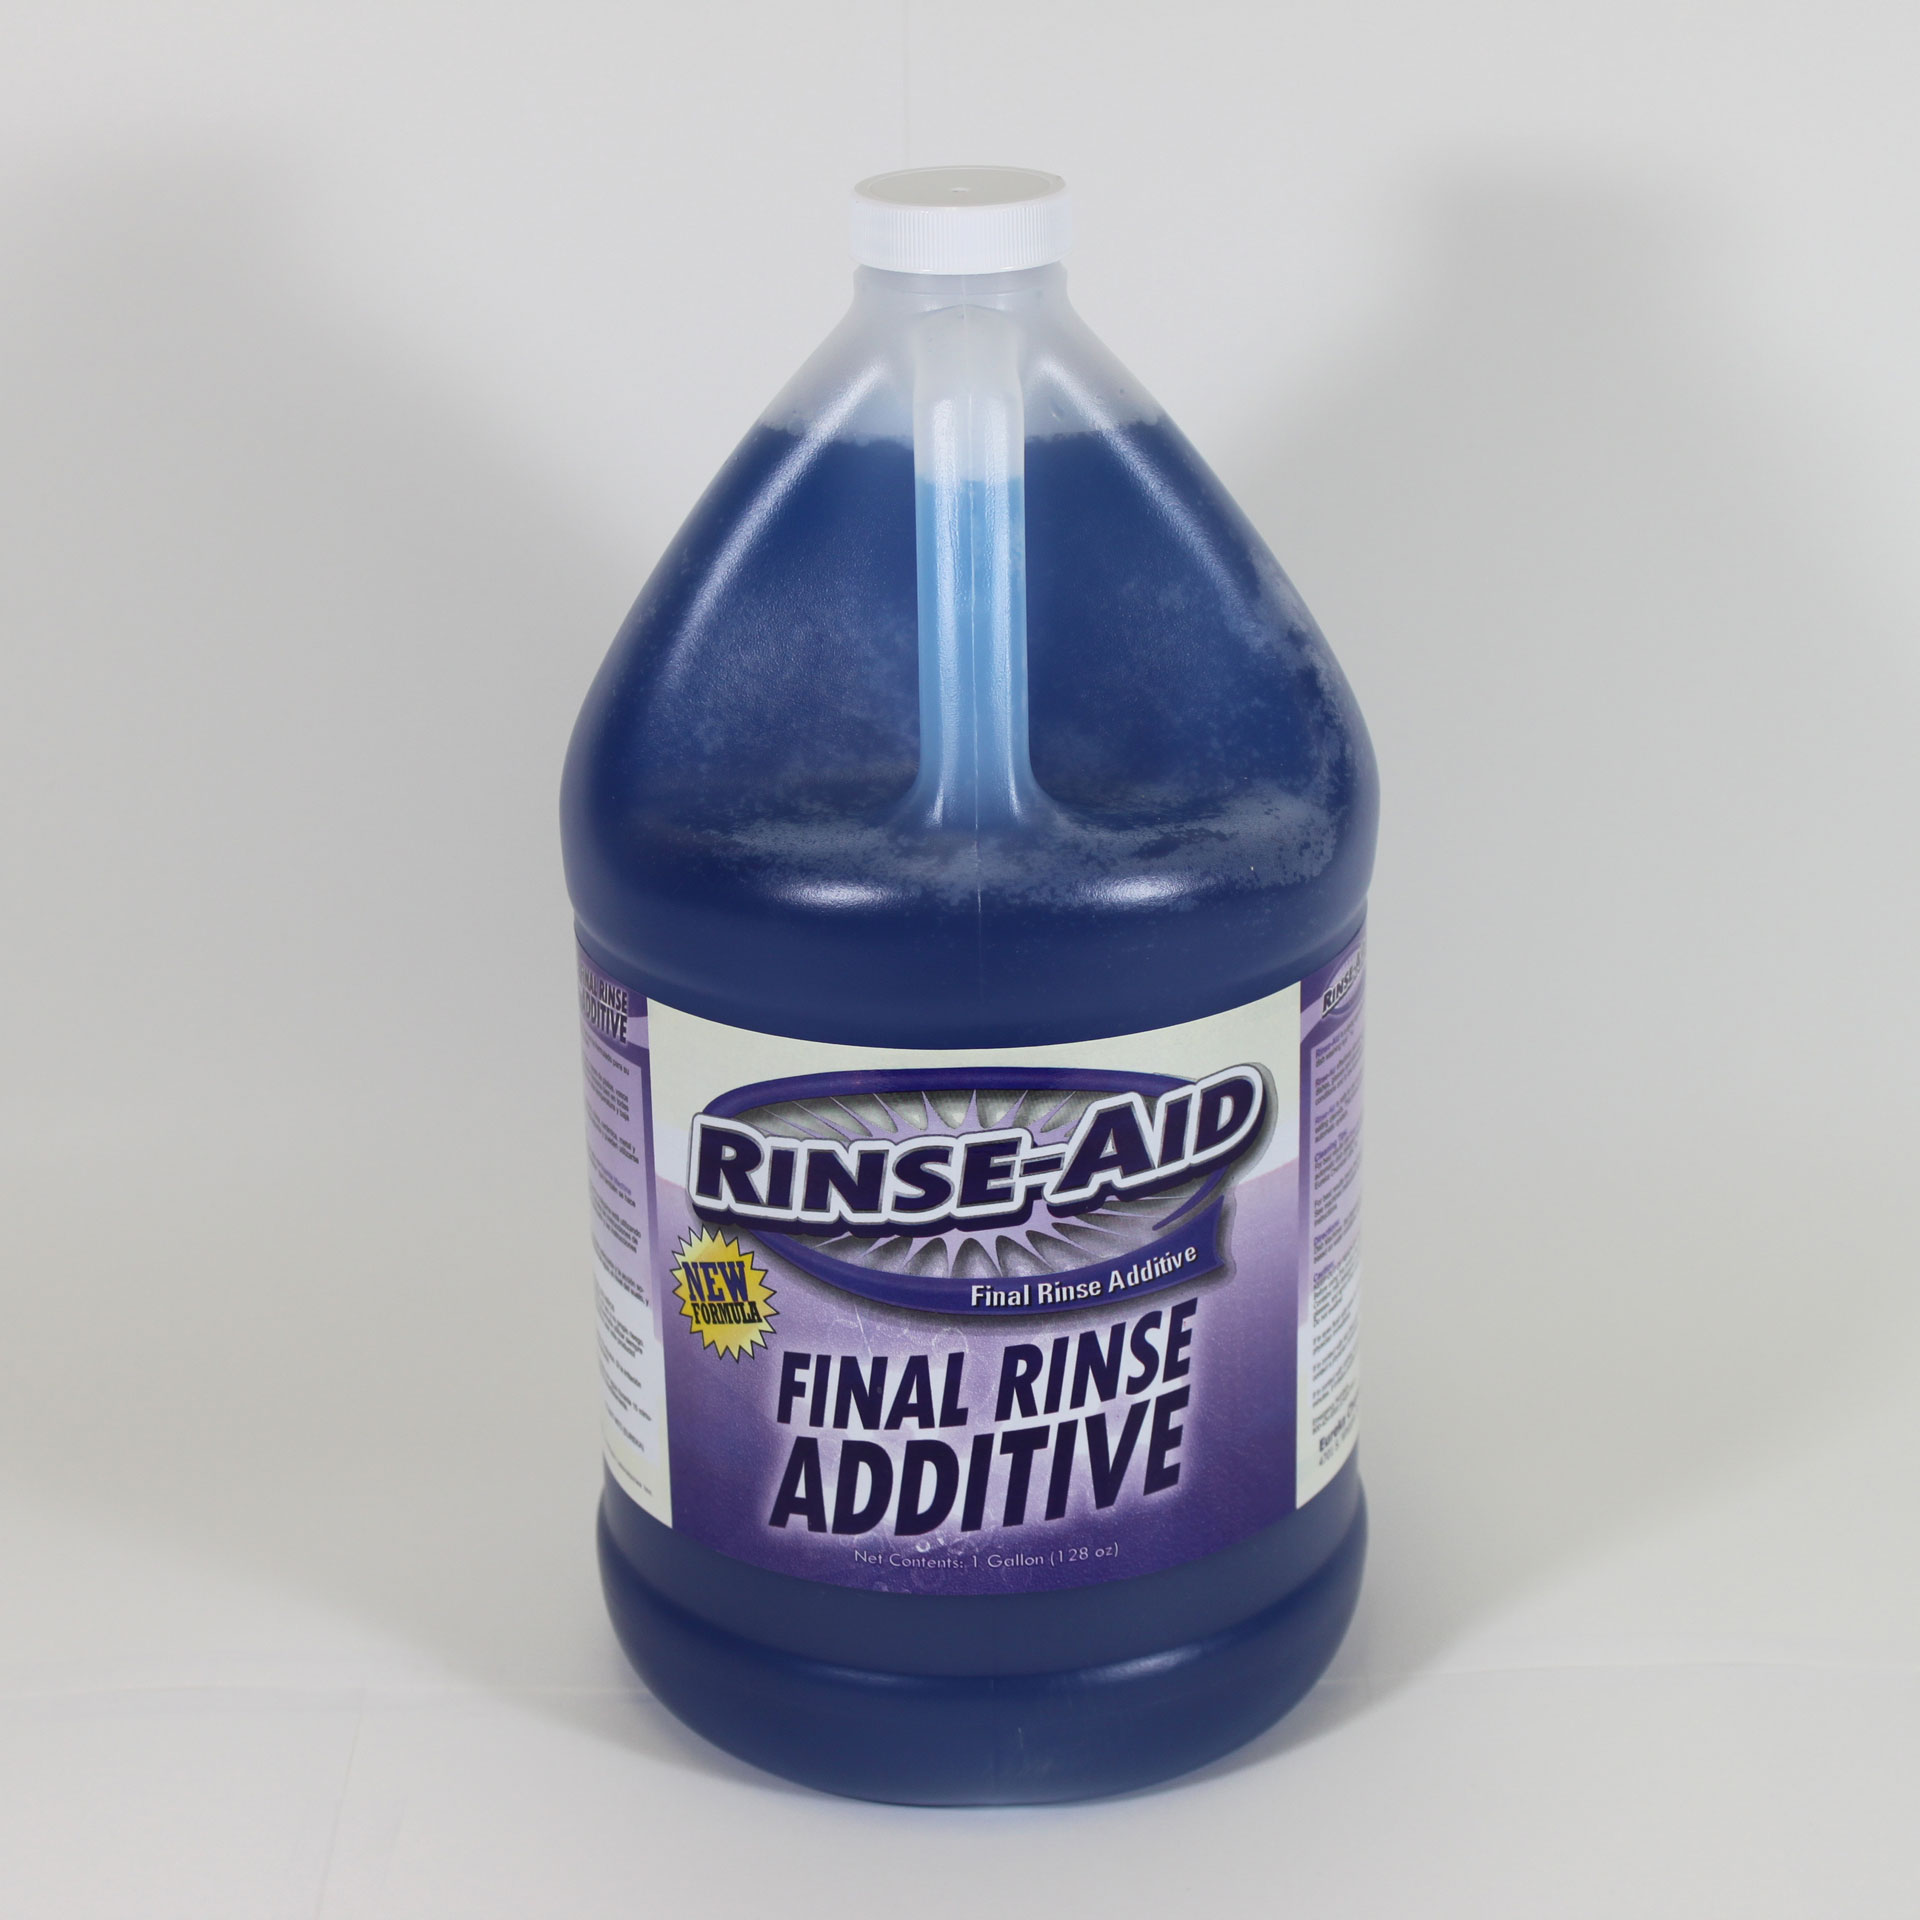 Bottle of Rinse-Aid.